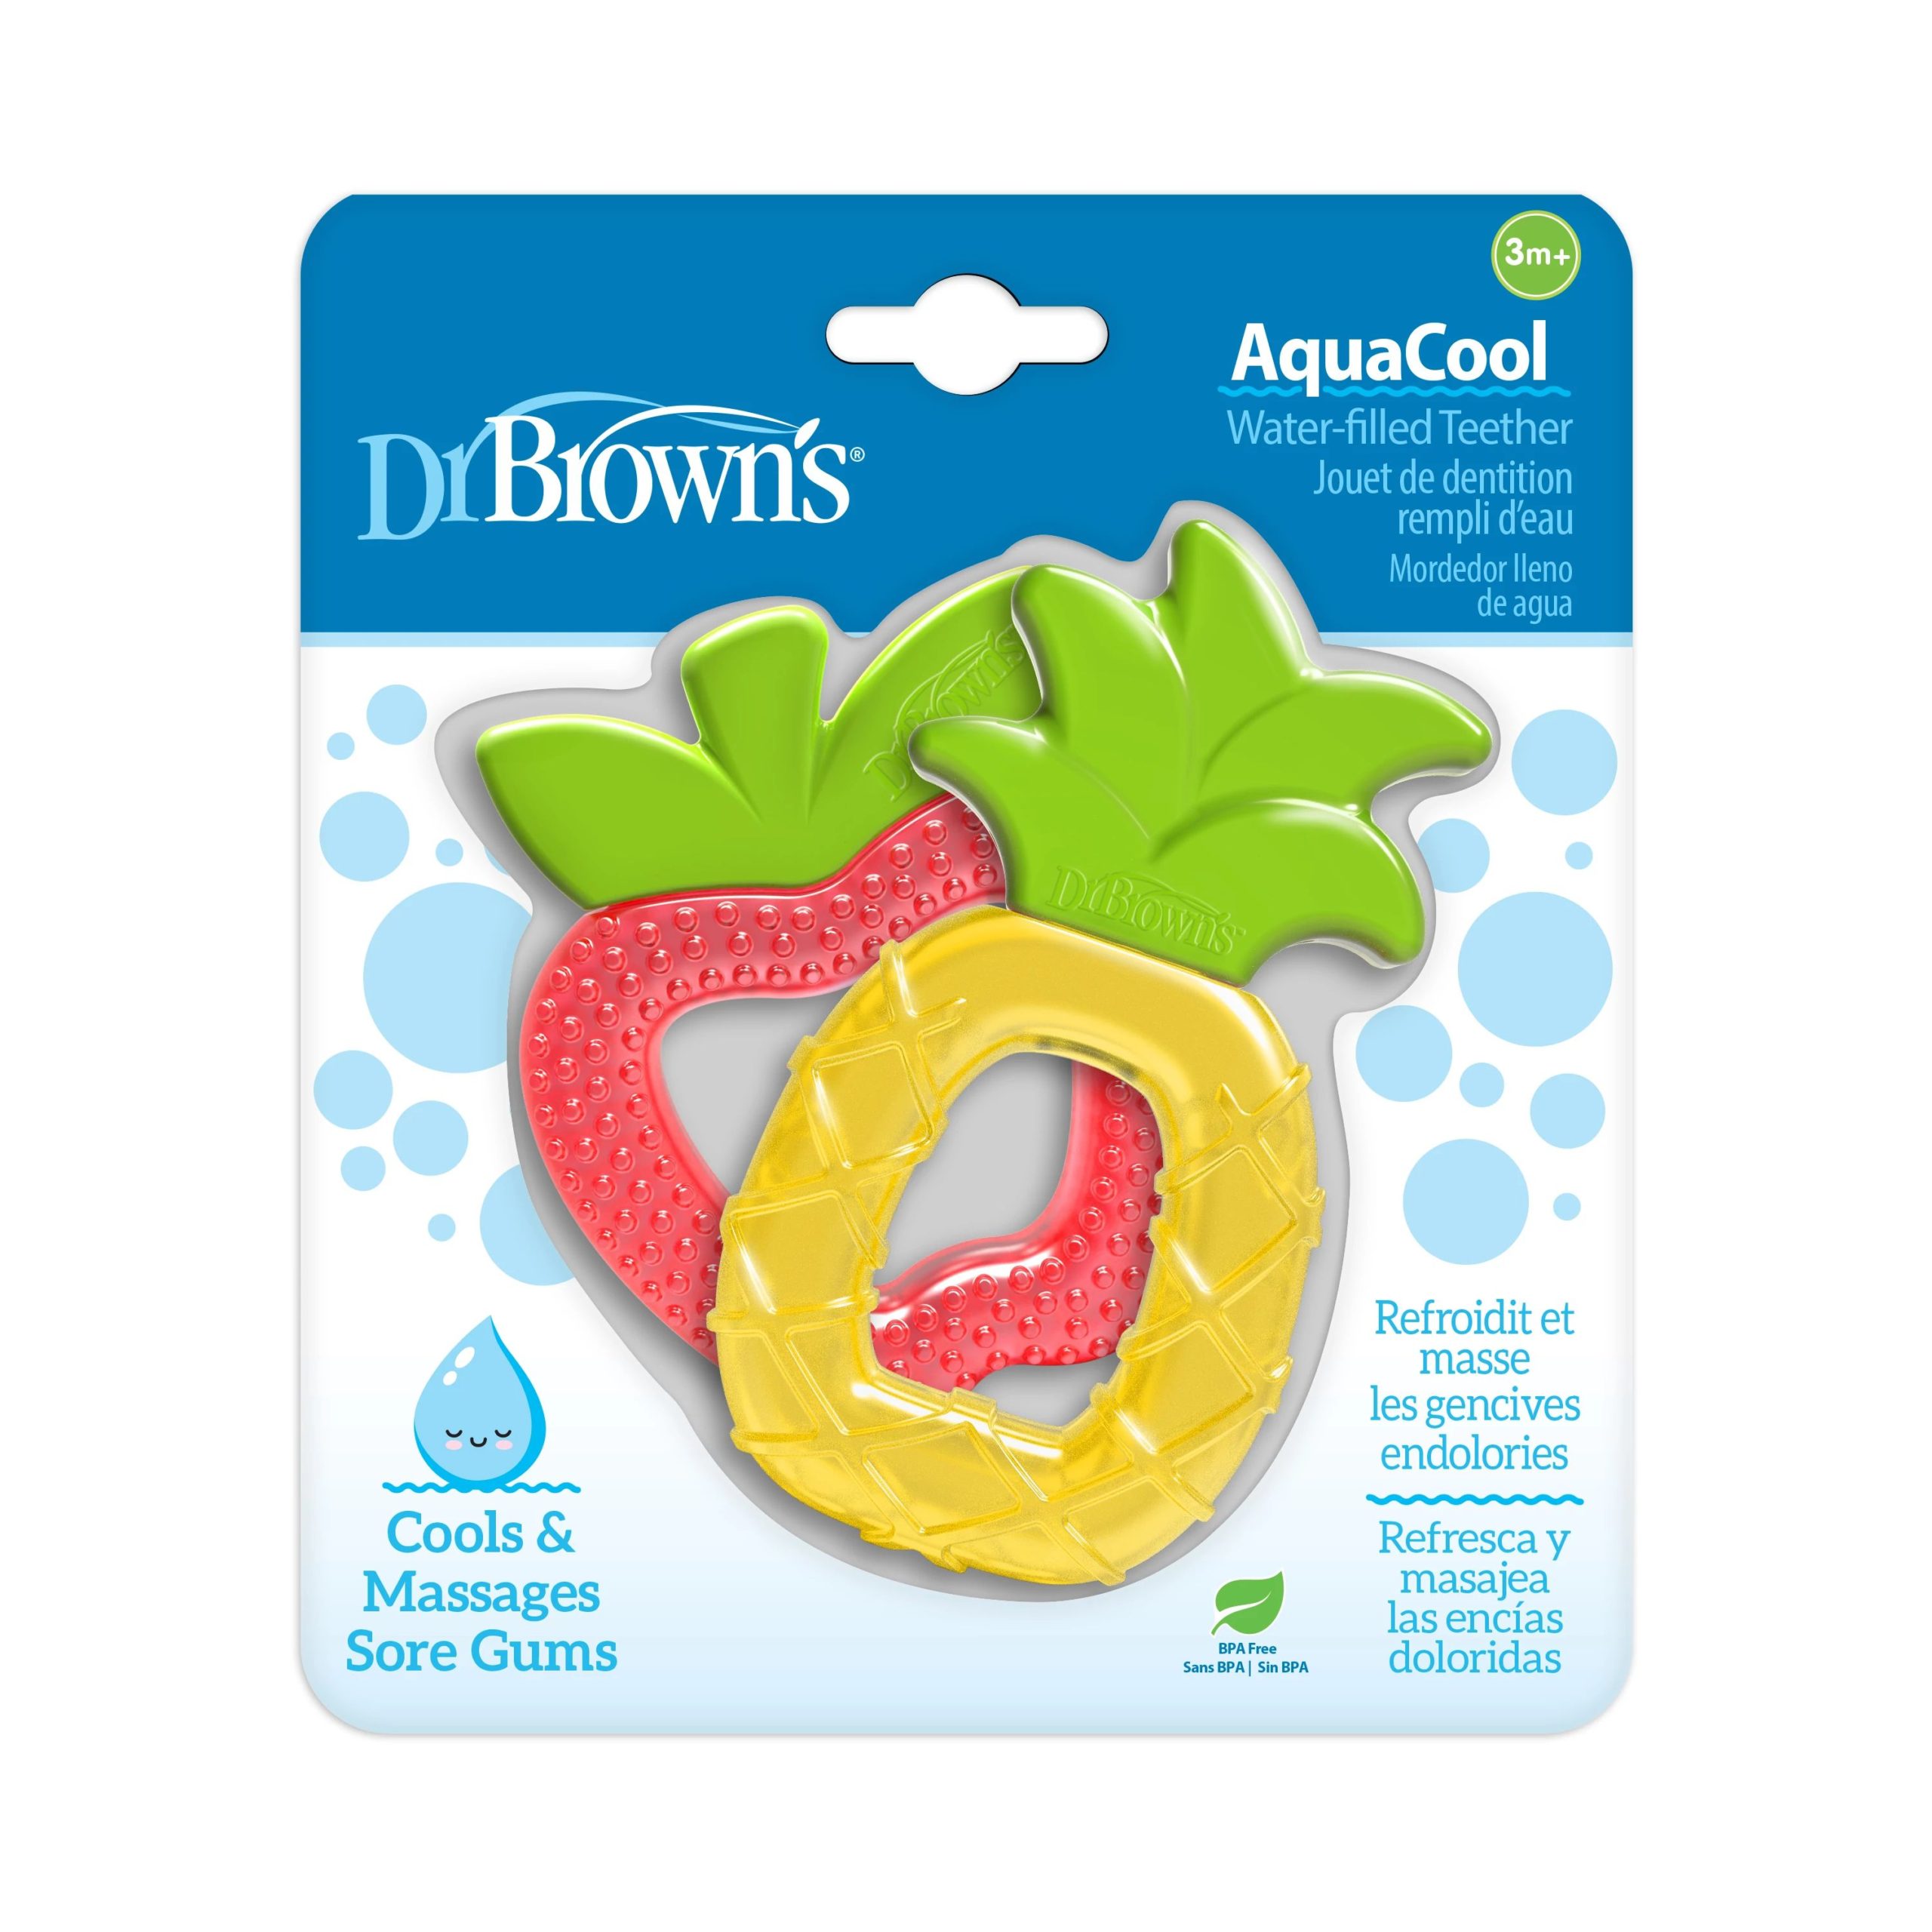 Possible Free Dr. Brown’s Water-Filled Teether